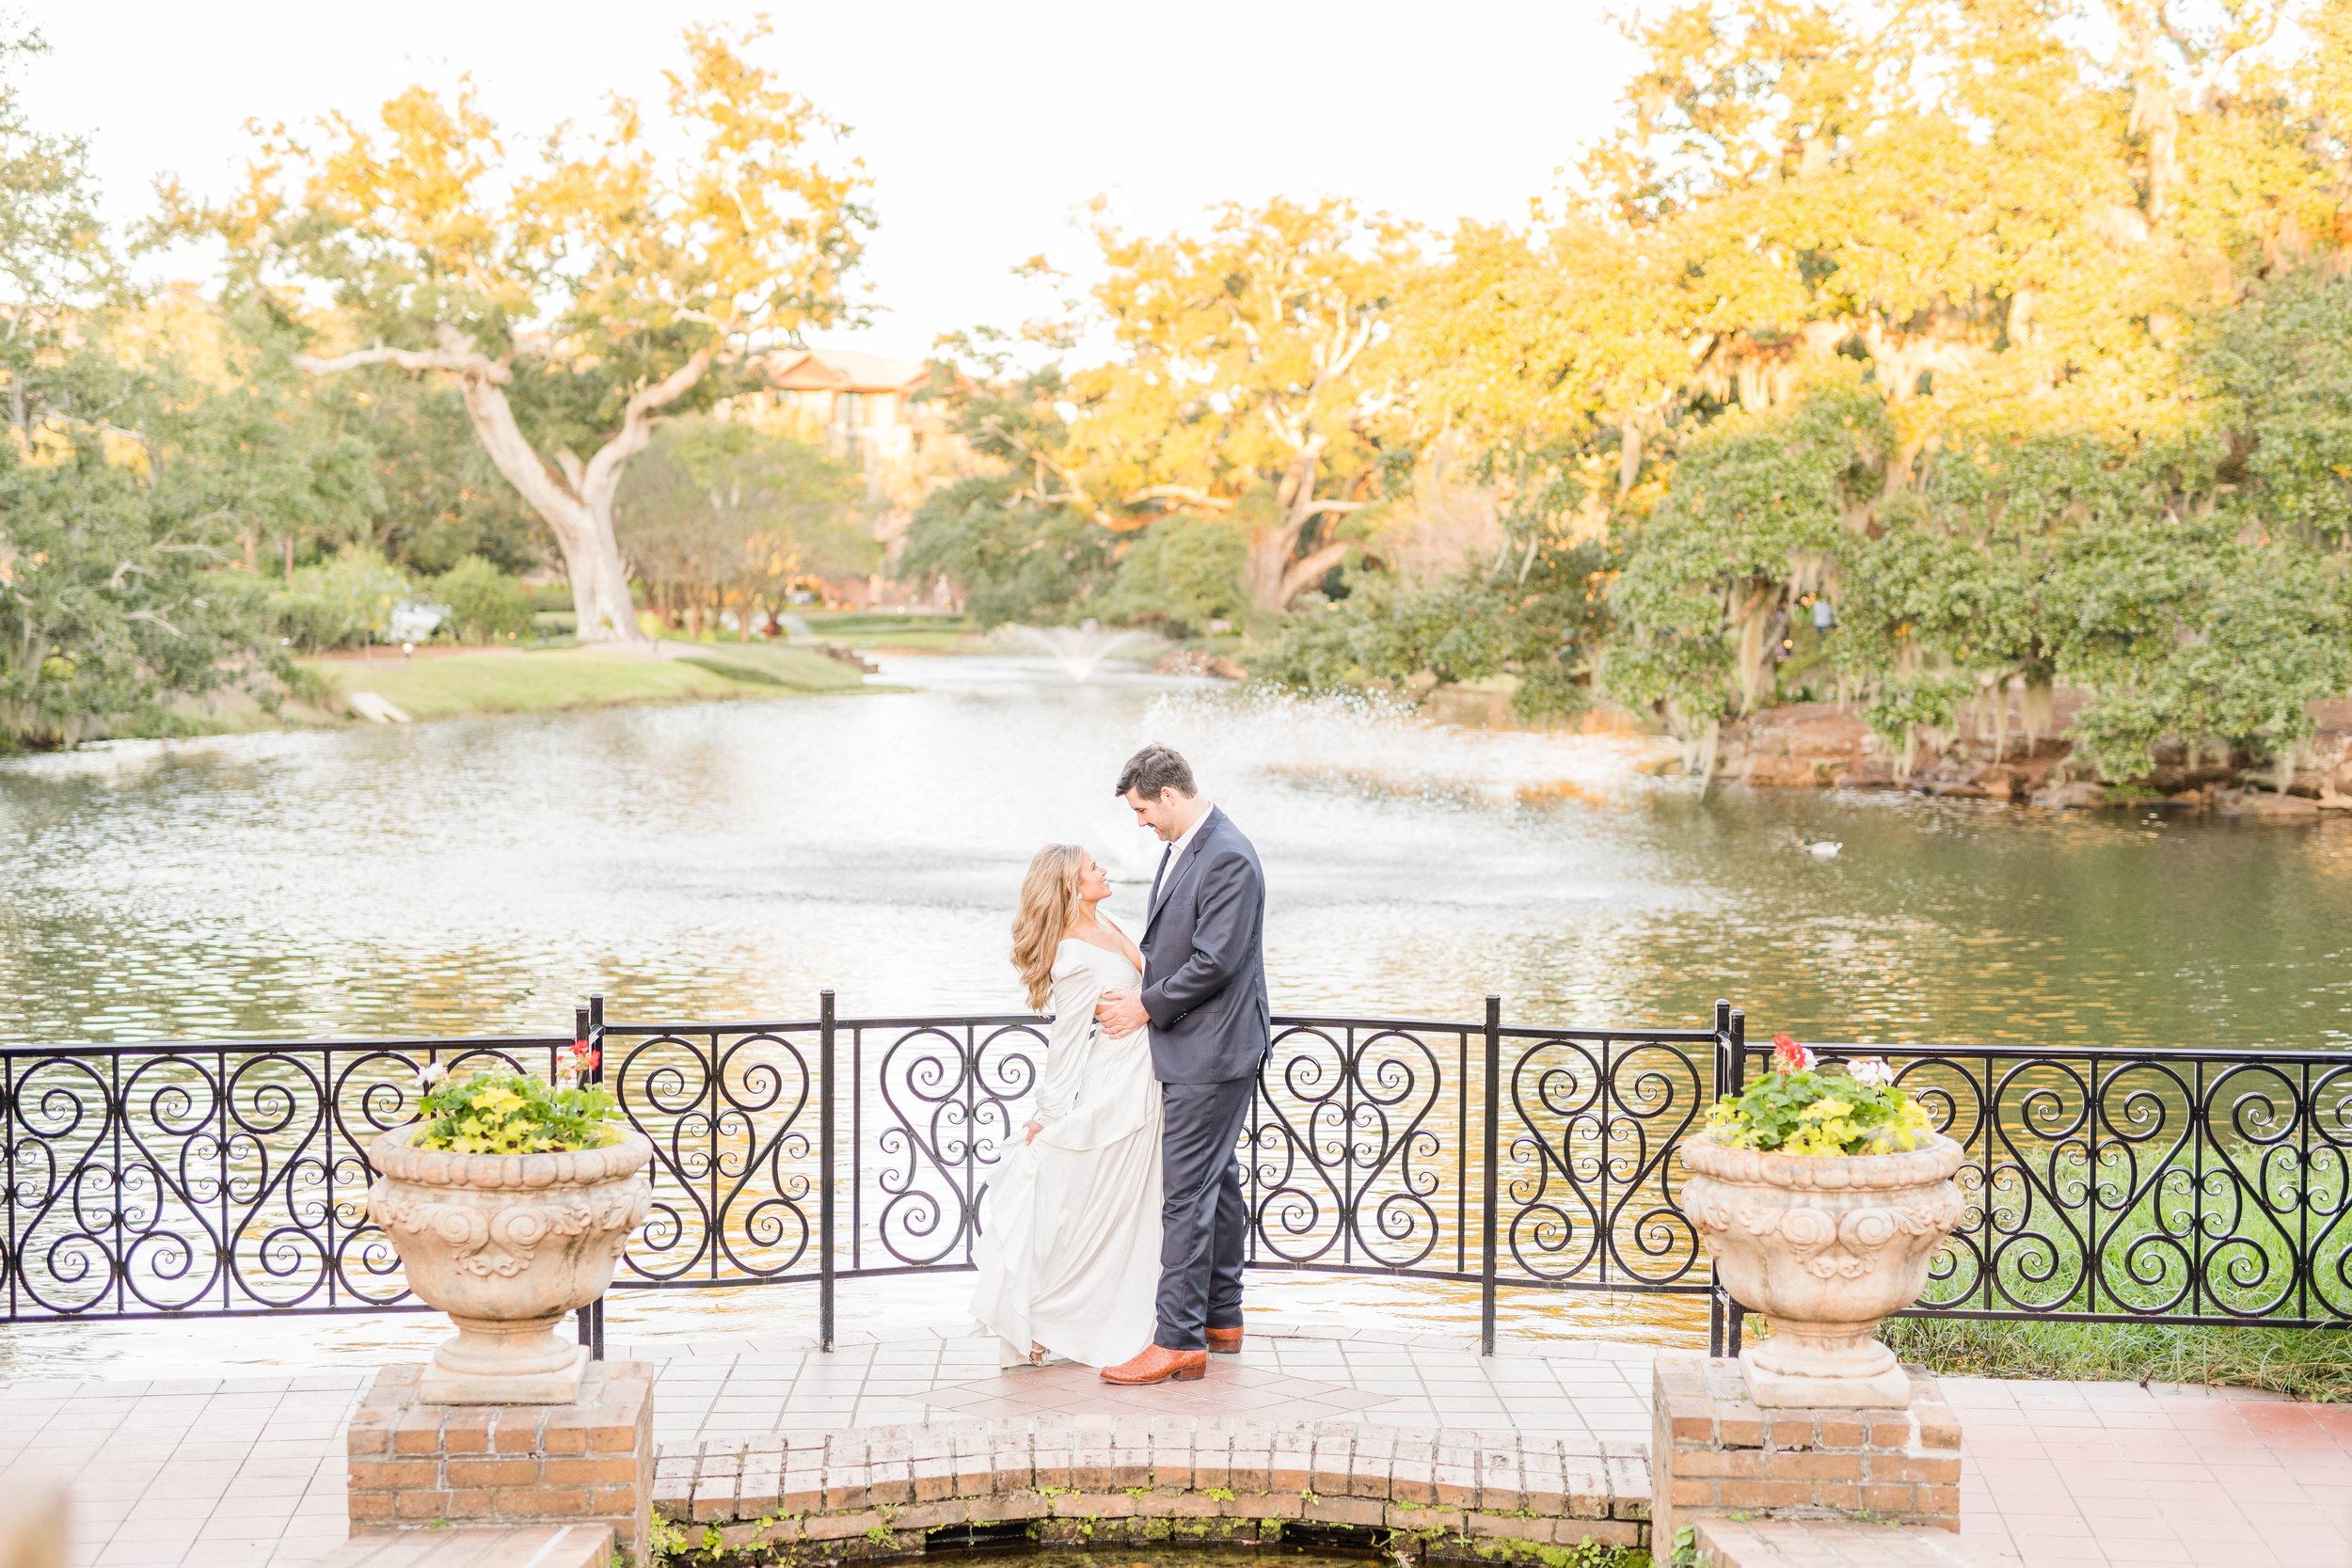 The Grand Hotel Fairhope Alabama Engagement Photoshoot photographed by Kristen Marcus Photography